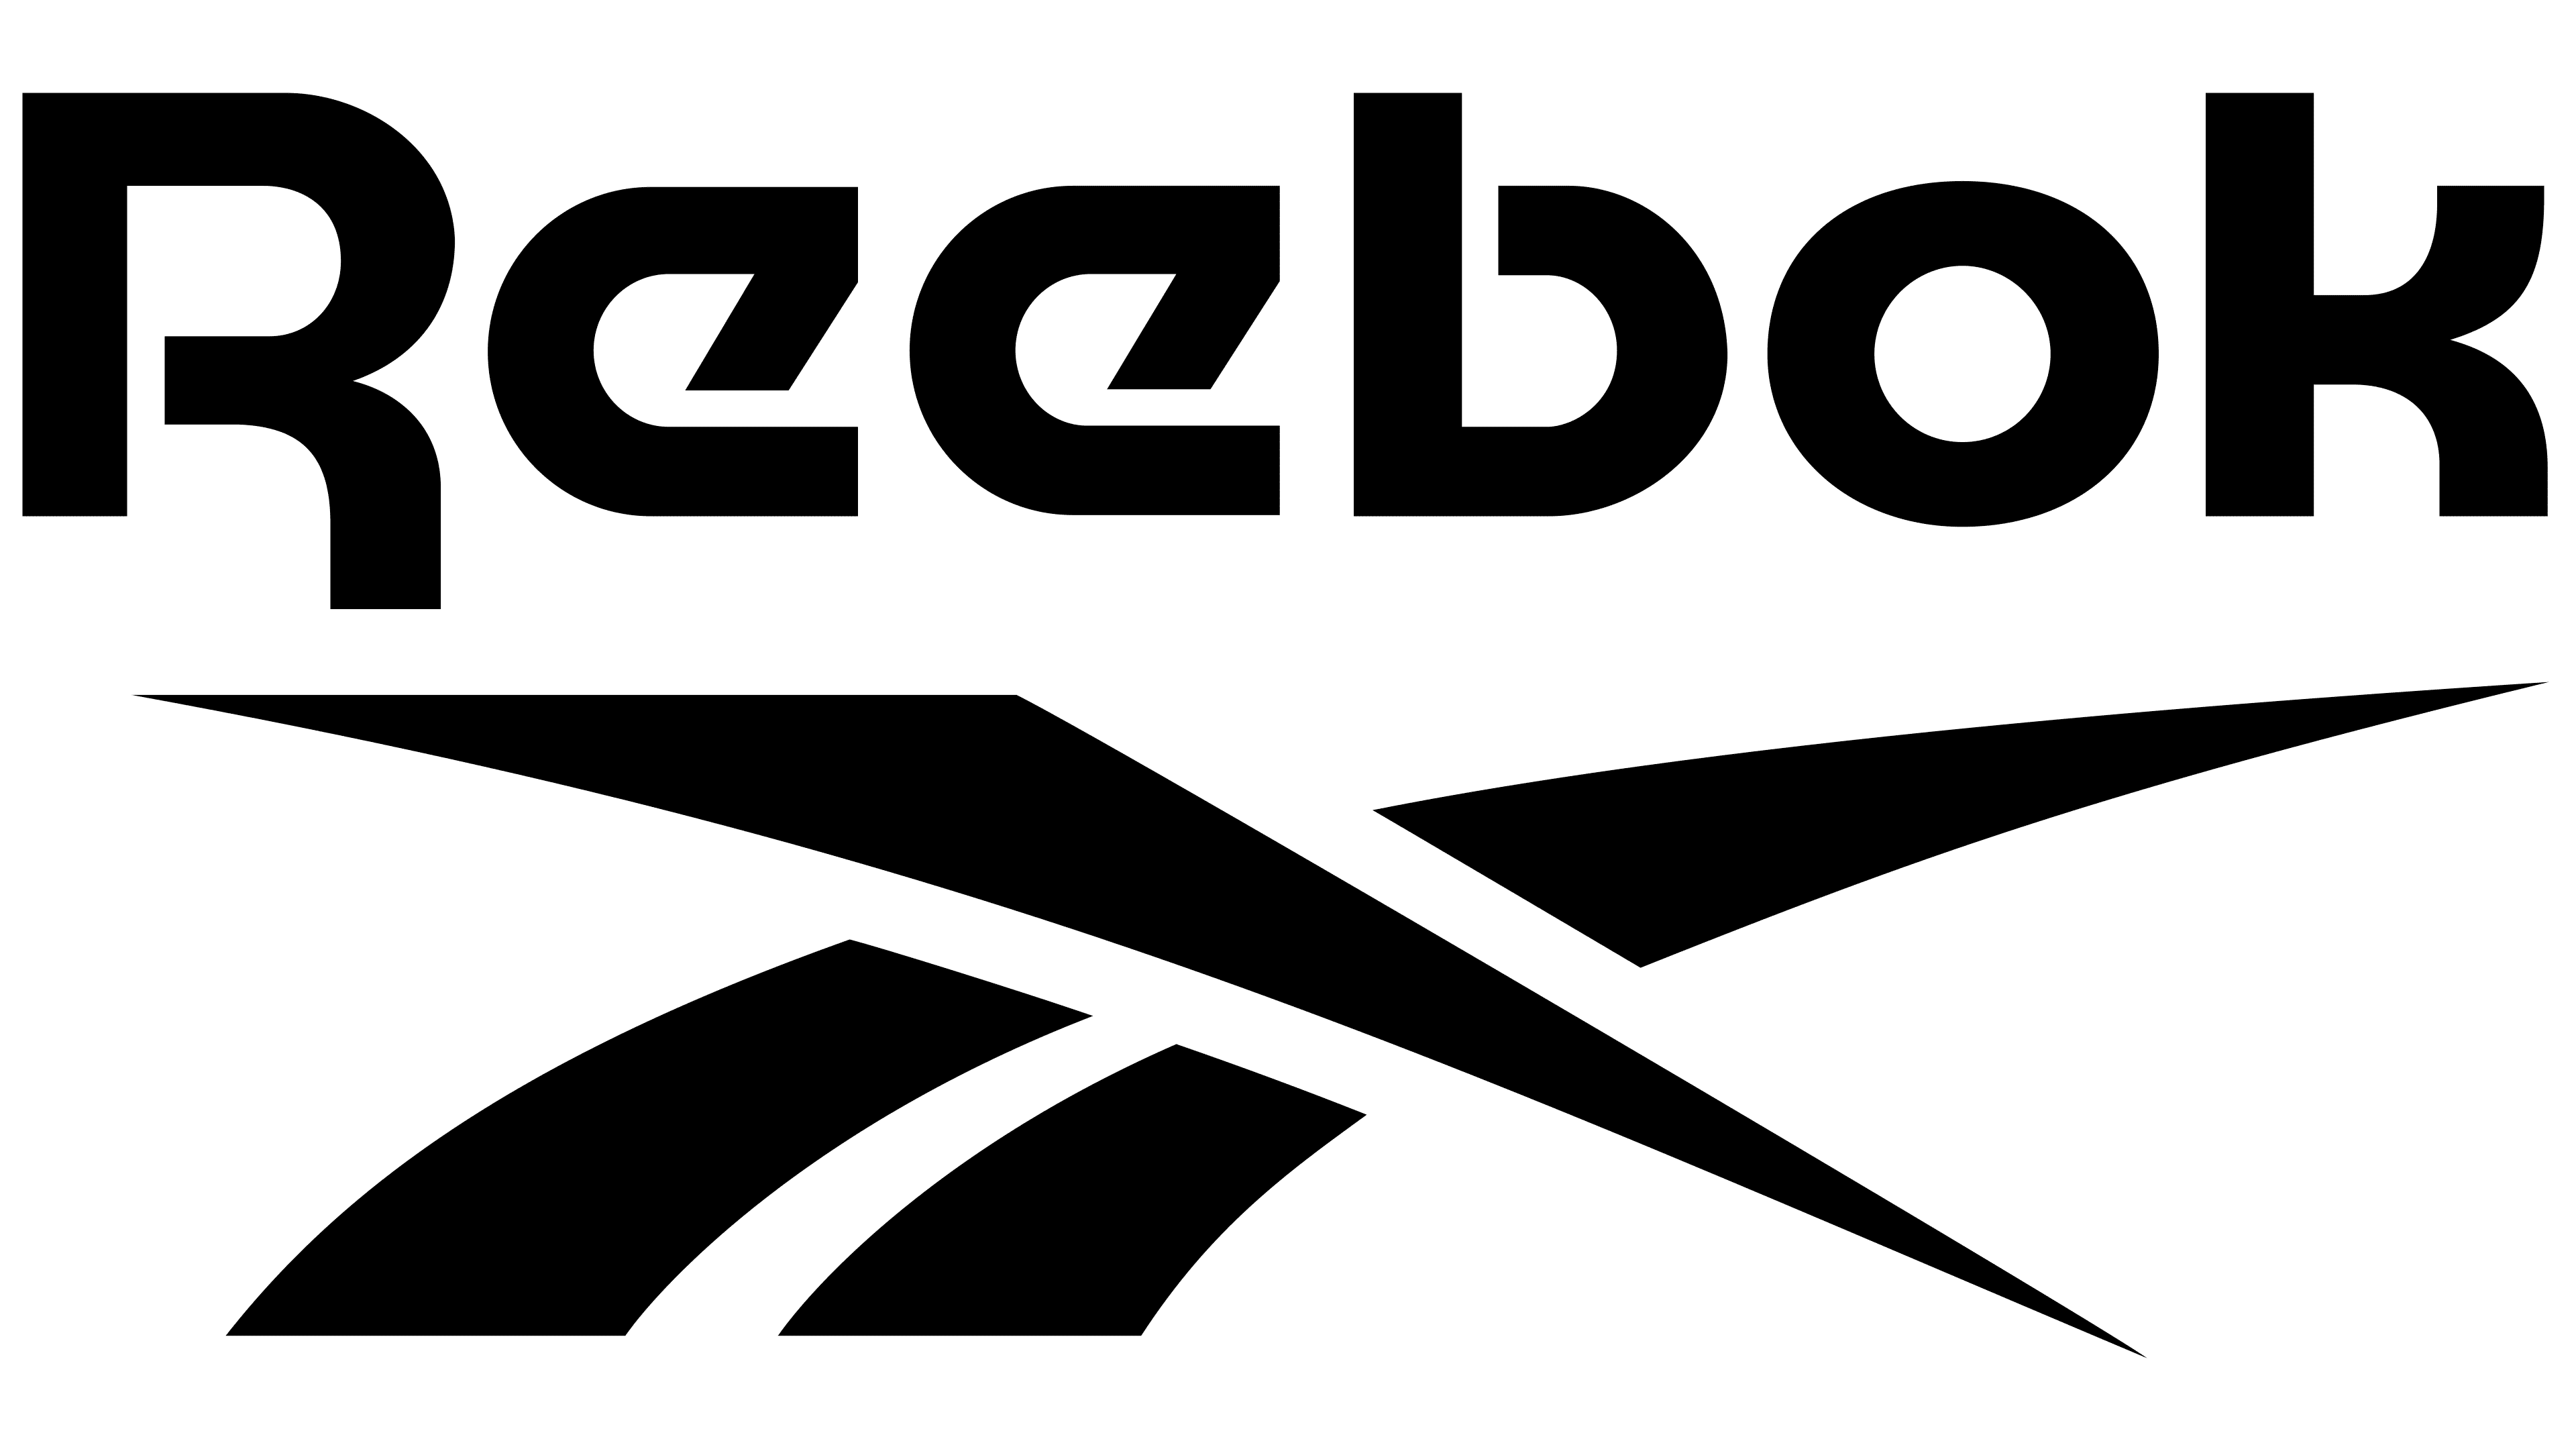 Reebok Logo, symbol, meaning, History and Evolution